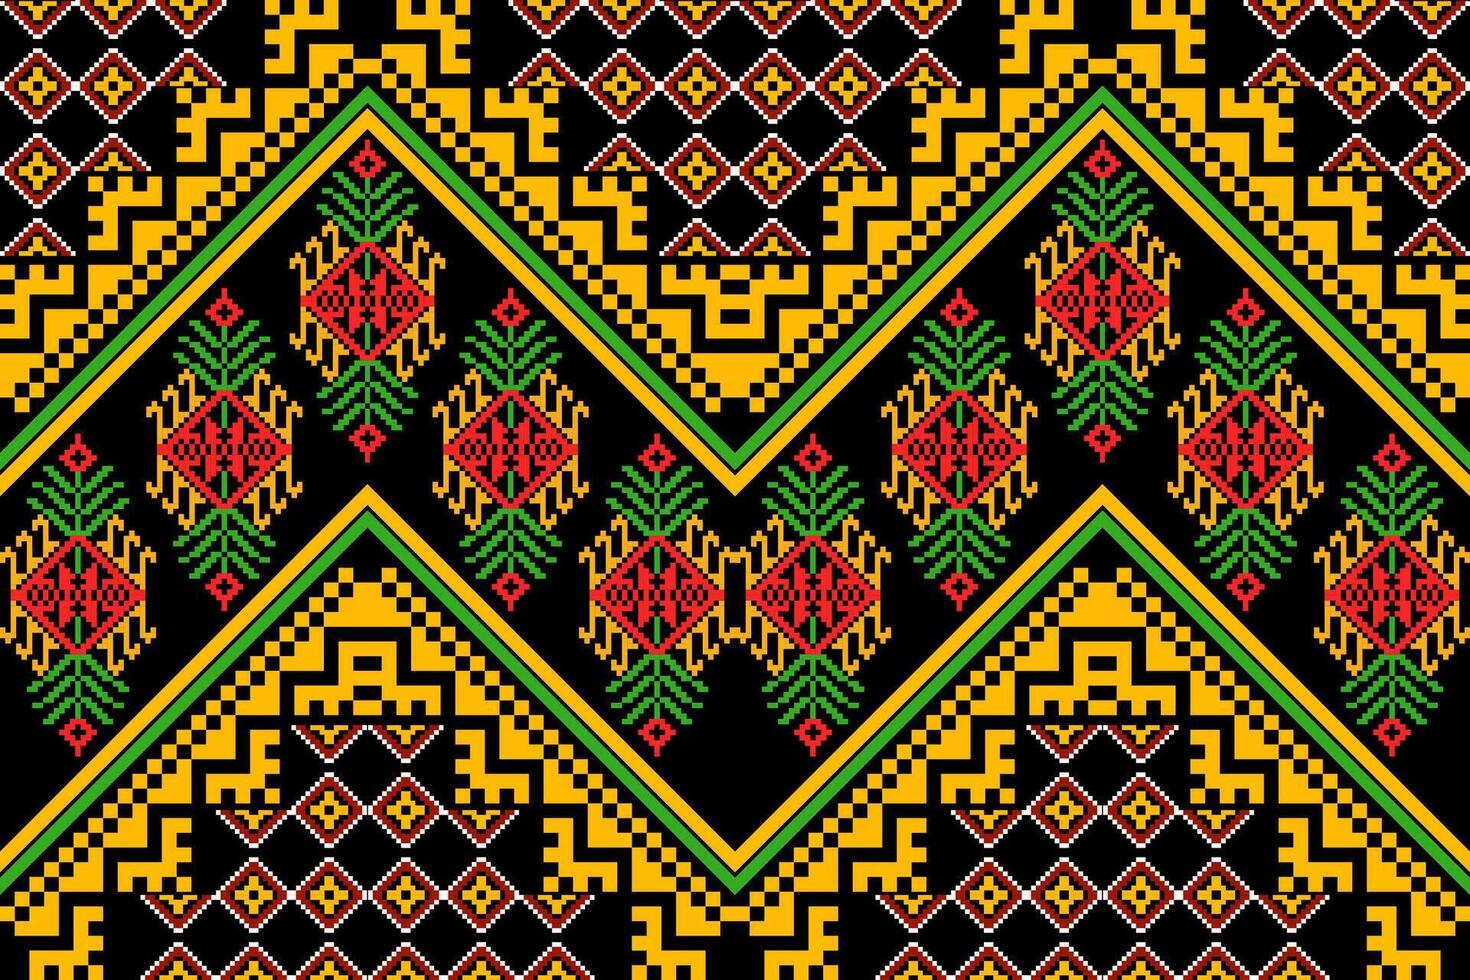 Aztec tribal geometric background in black red yellow white Seamless stripe pattern. Traditional ornament ethnic style. Design for textile, fabric, clothing, curtain, rug, ornament, wrapping. vector